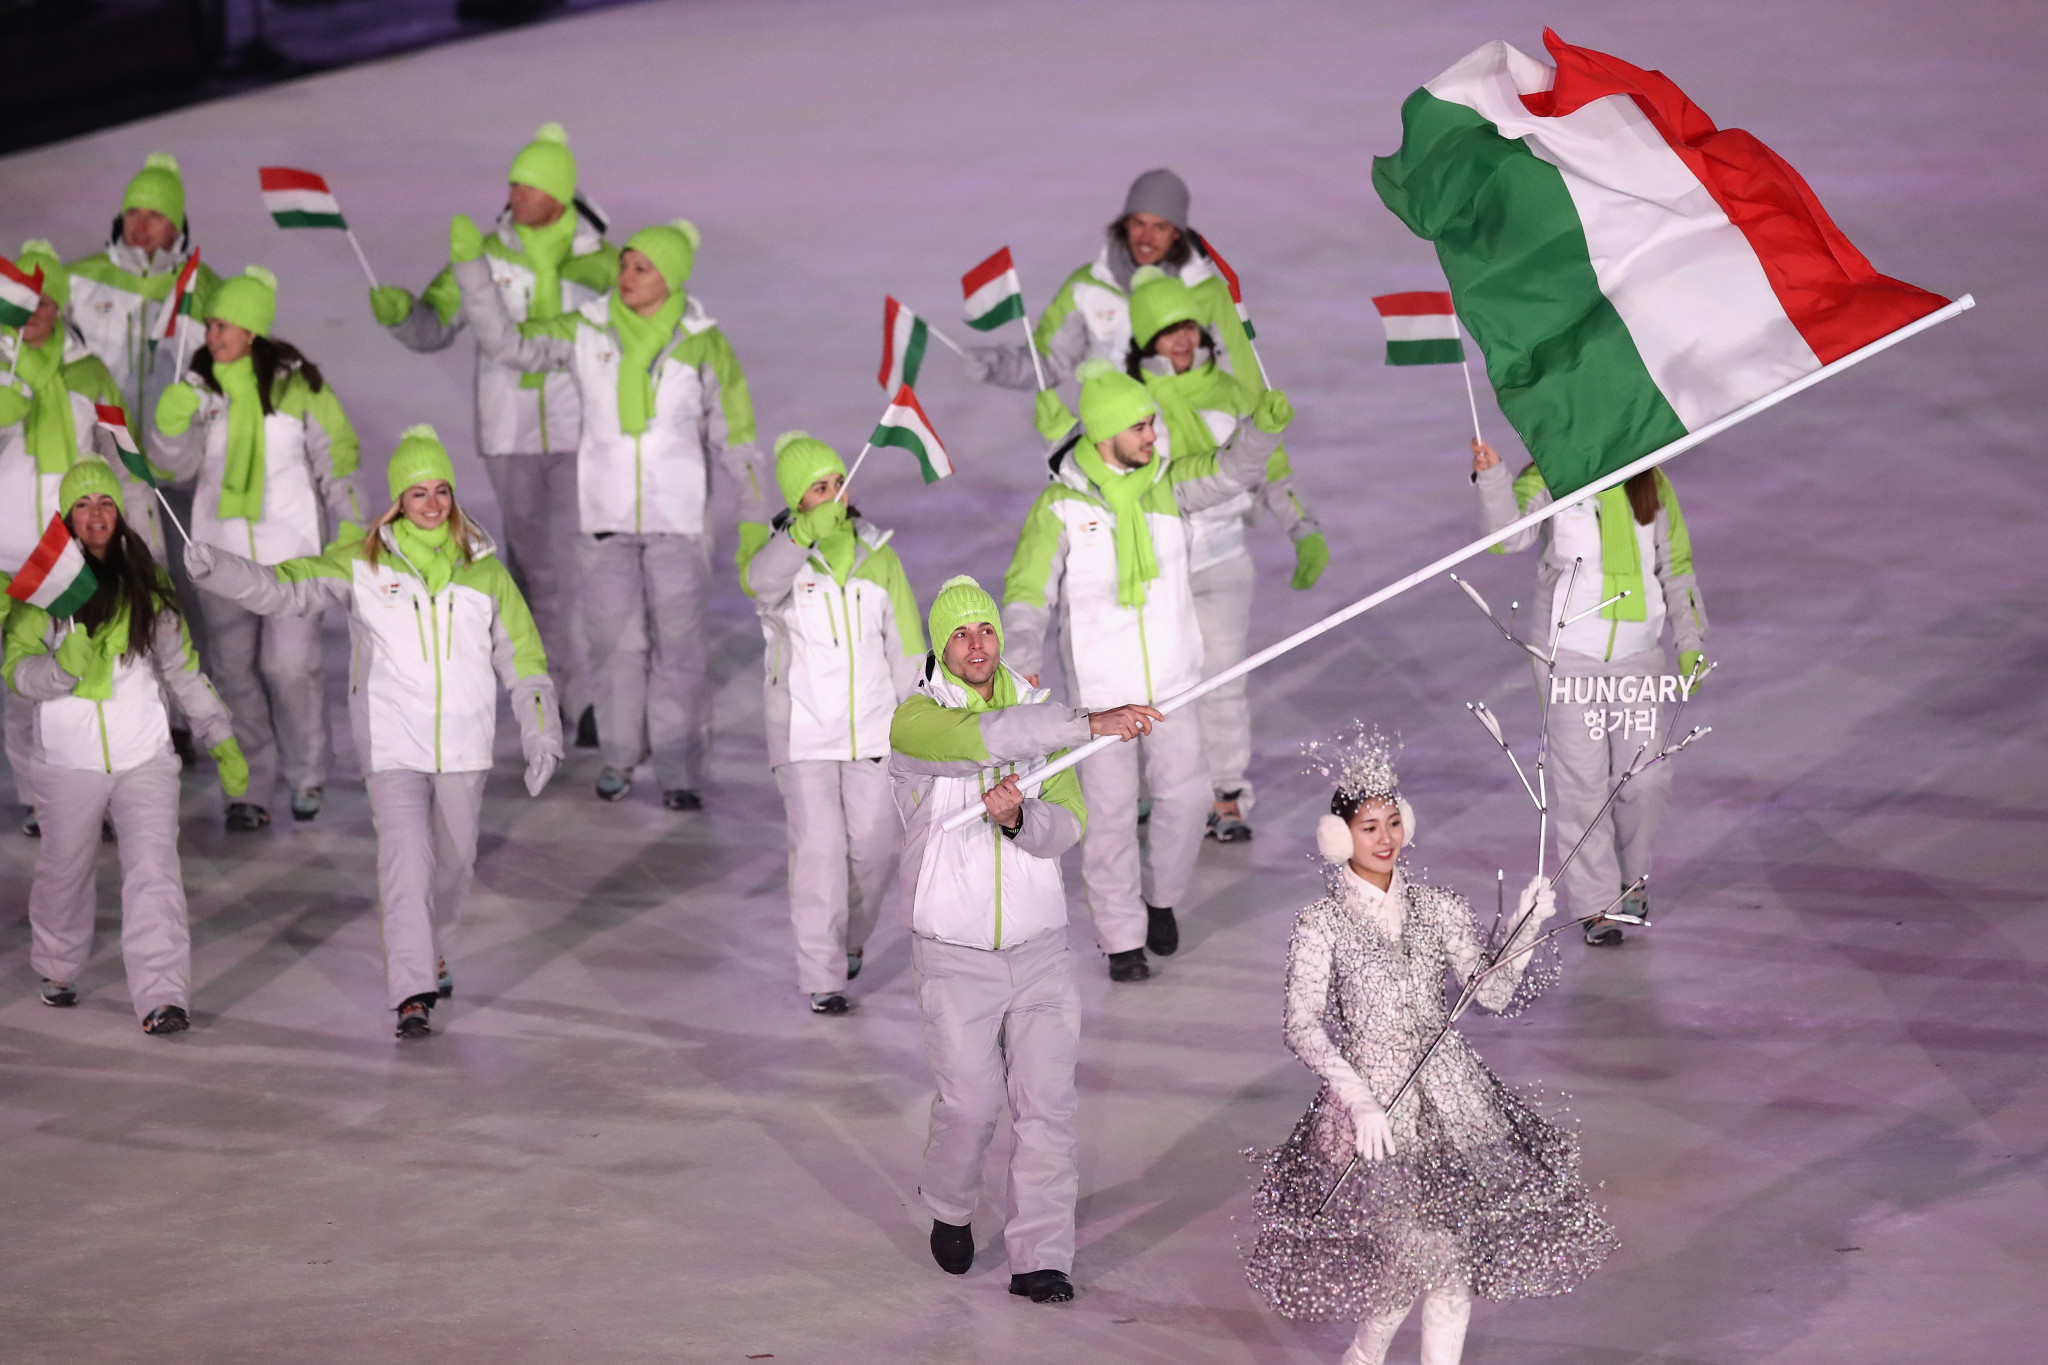 Hungarian athletes told they need three vaccinations to compete at Beijing 2022